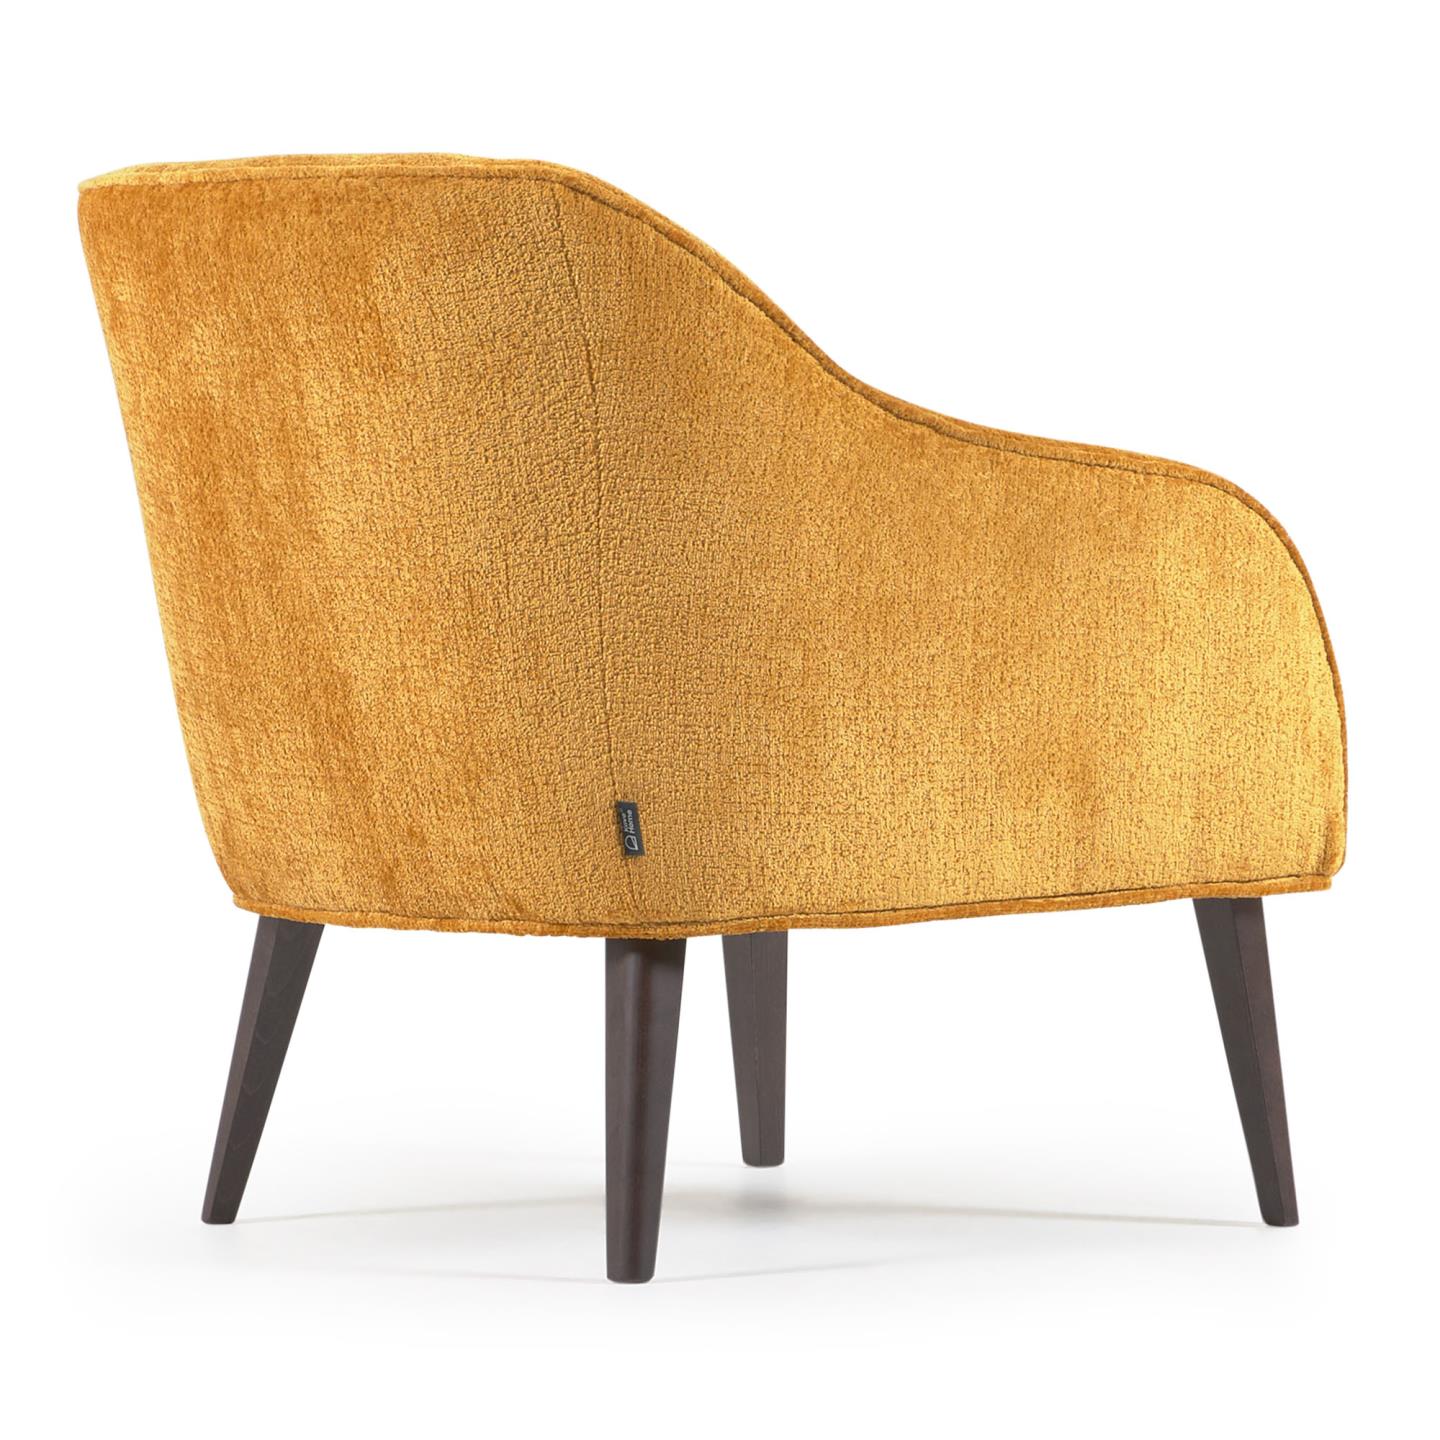 Bobly armchair in mustard chenille and wooden legs with wenge finish